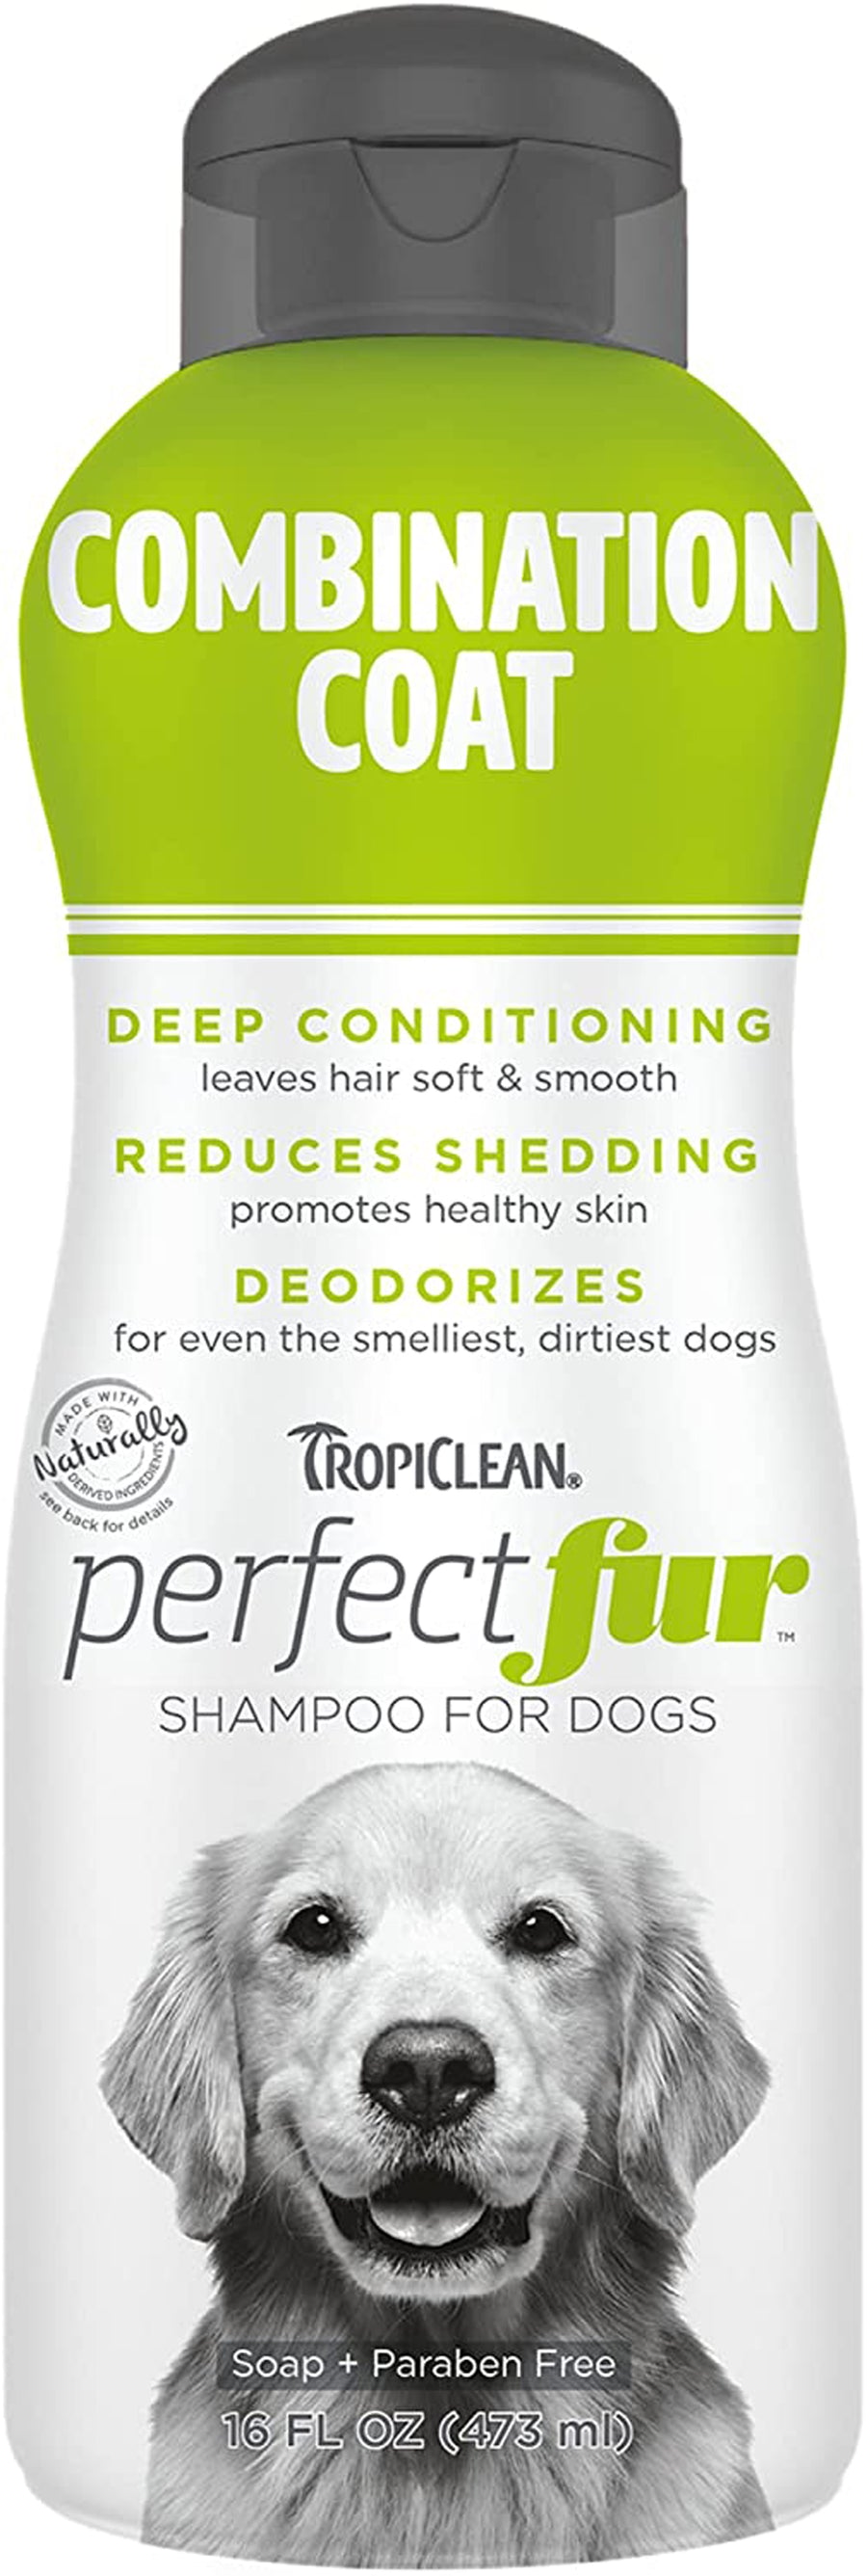 TropiClean PerfectFur Long Haired Coat Shampoo for Dogs 16oz